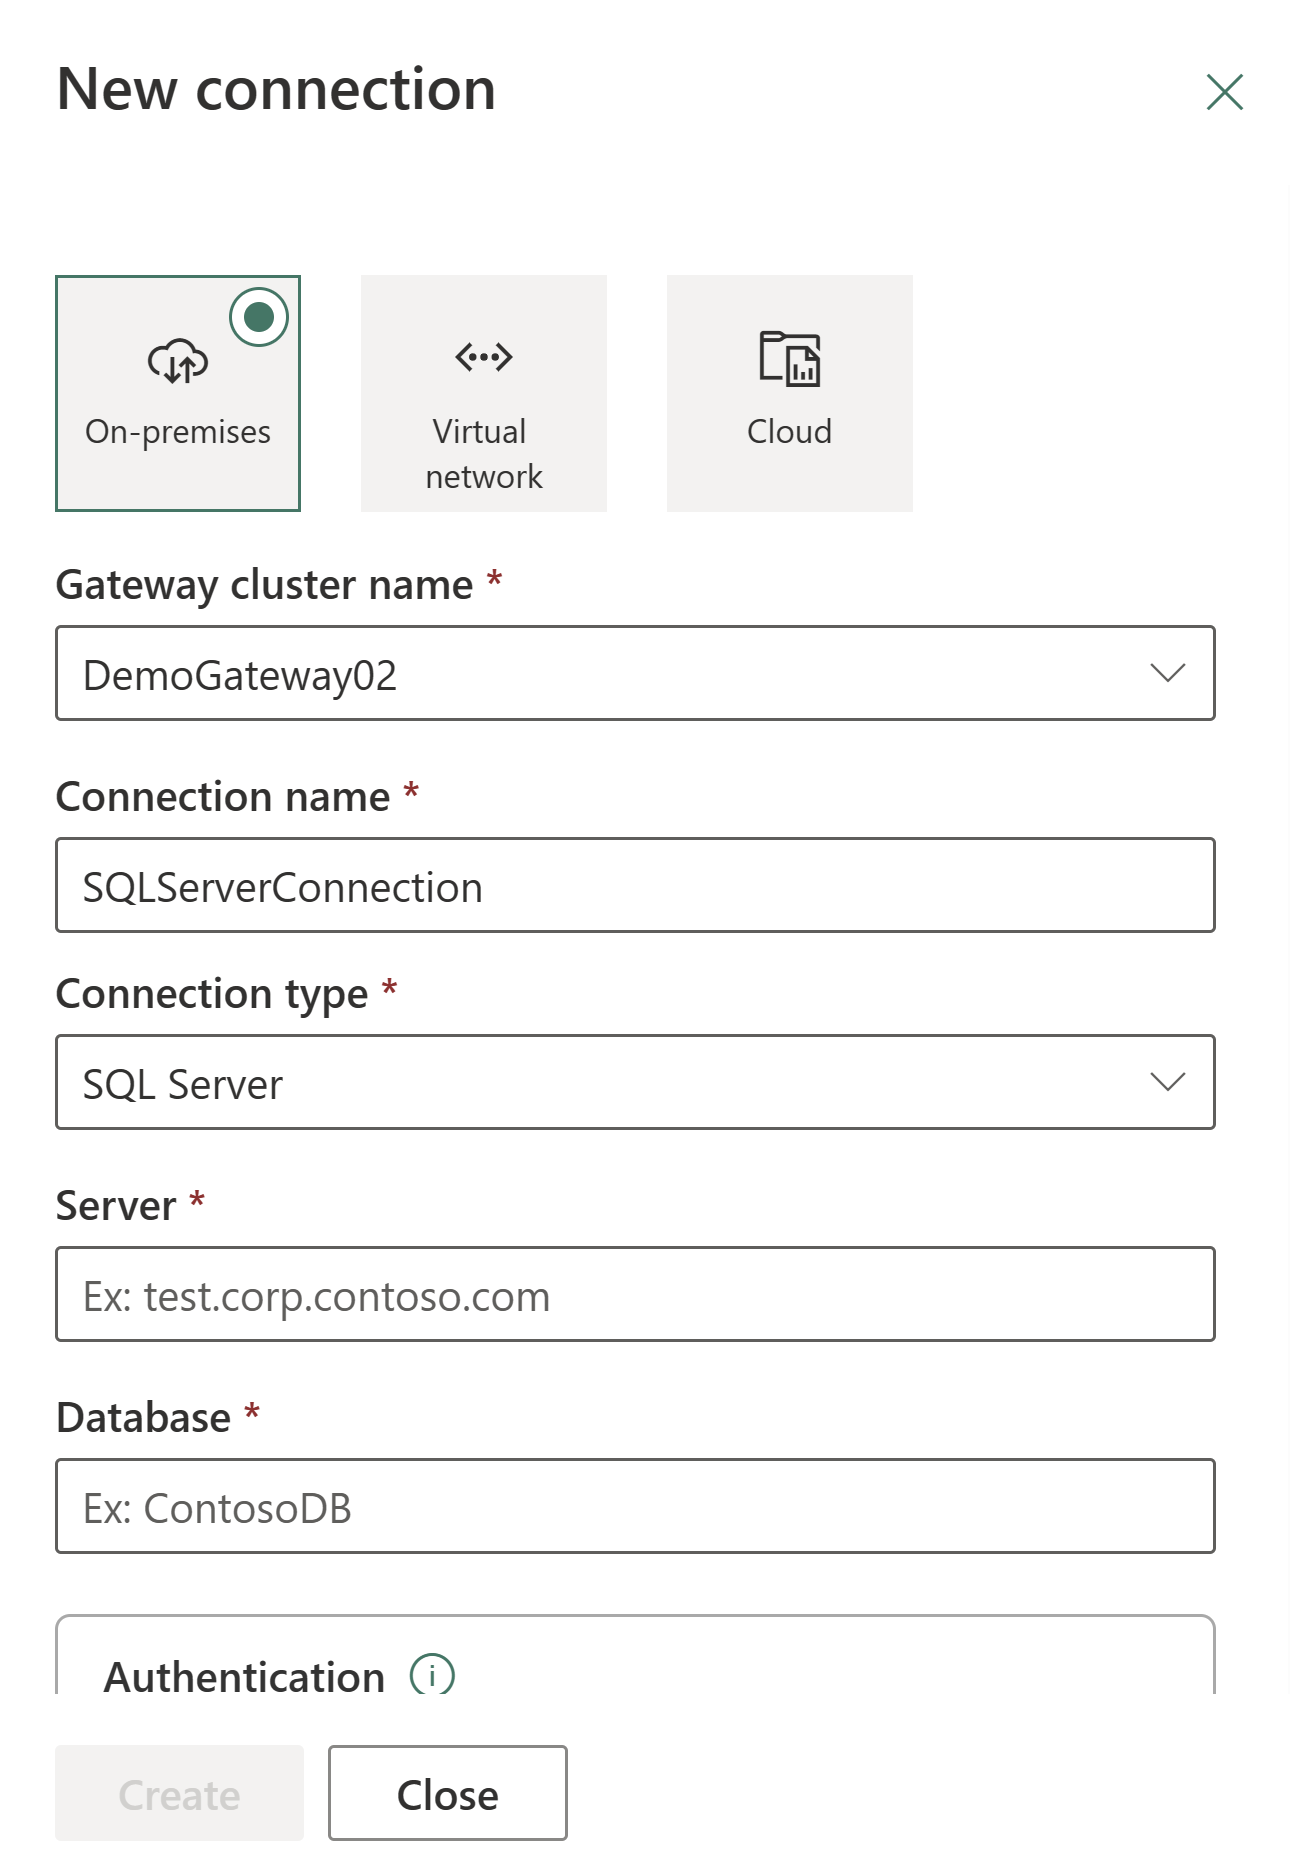 Screenshot showing the New connection dialog with On-premises selected.